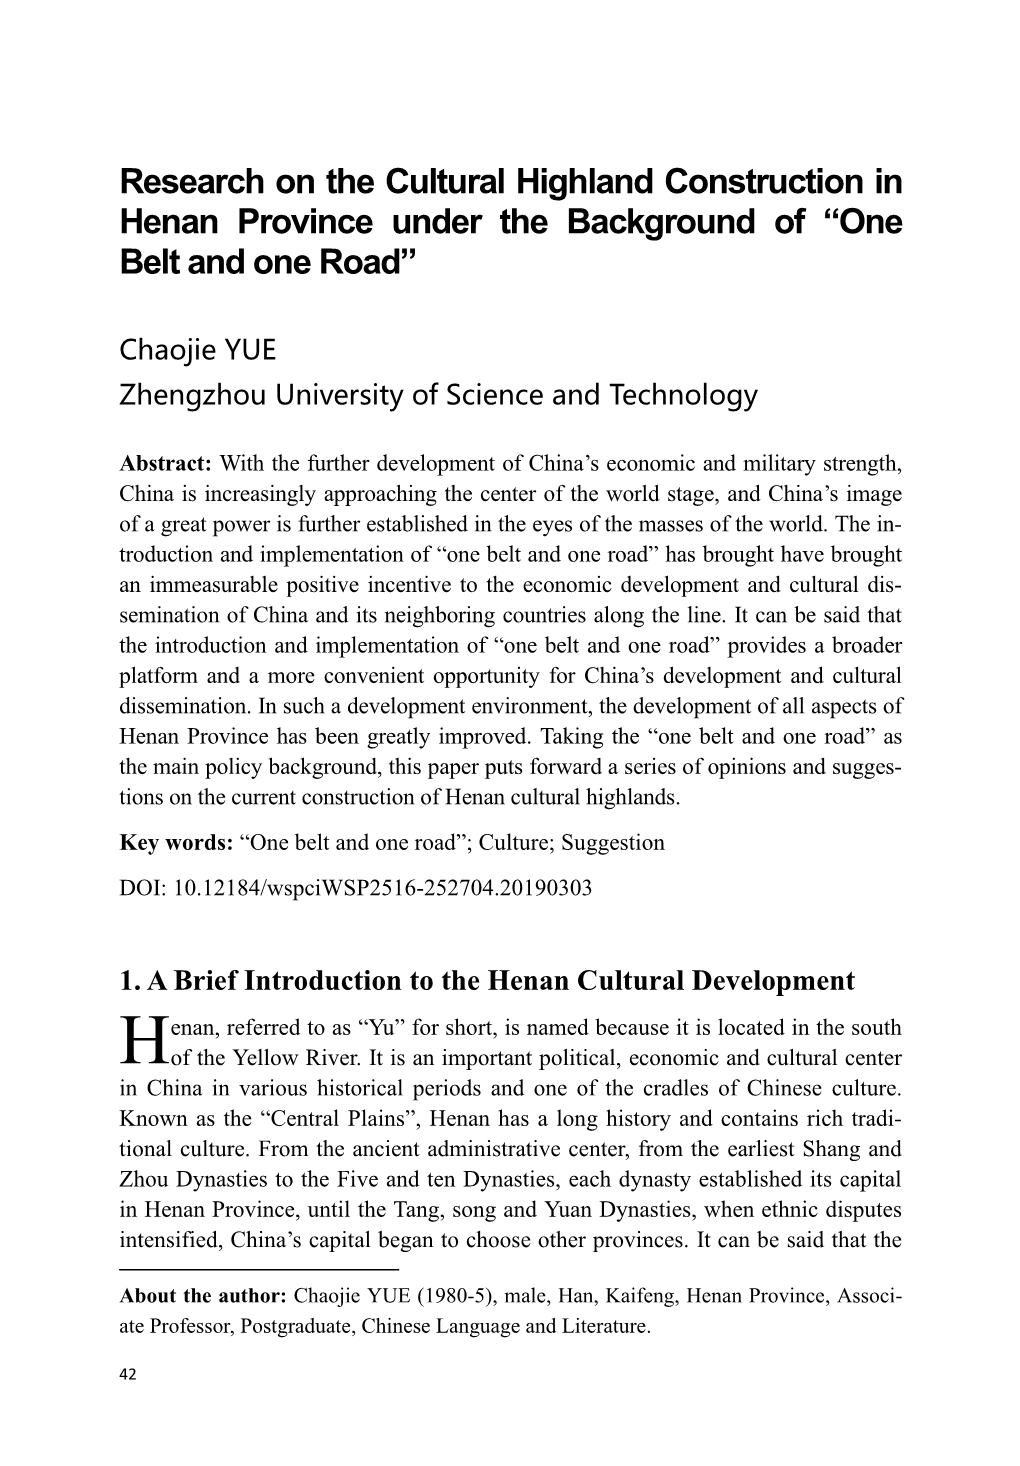 Research on the Cultural Highland Construction in Henan Province Under the Background of “One Belt and One Road”